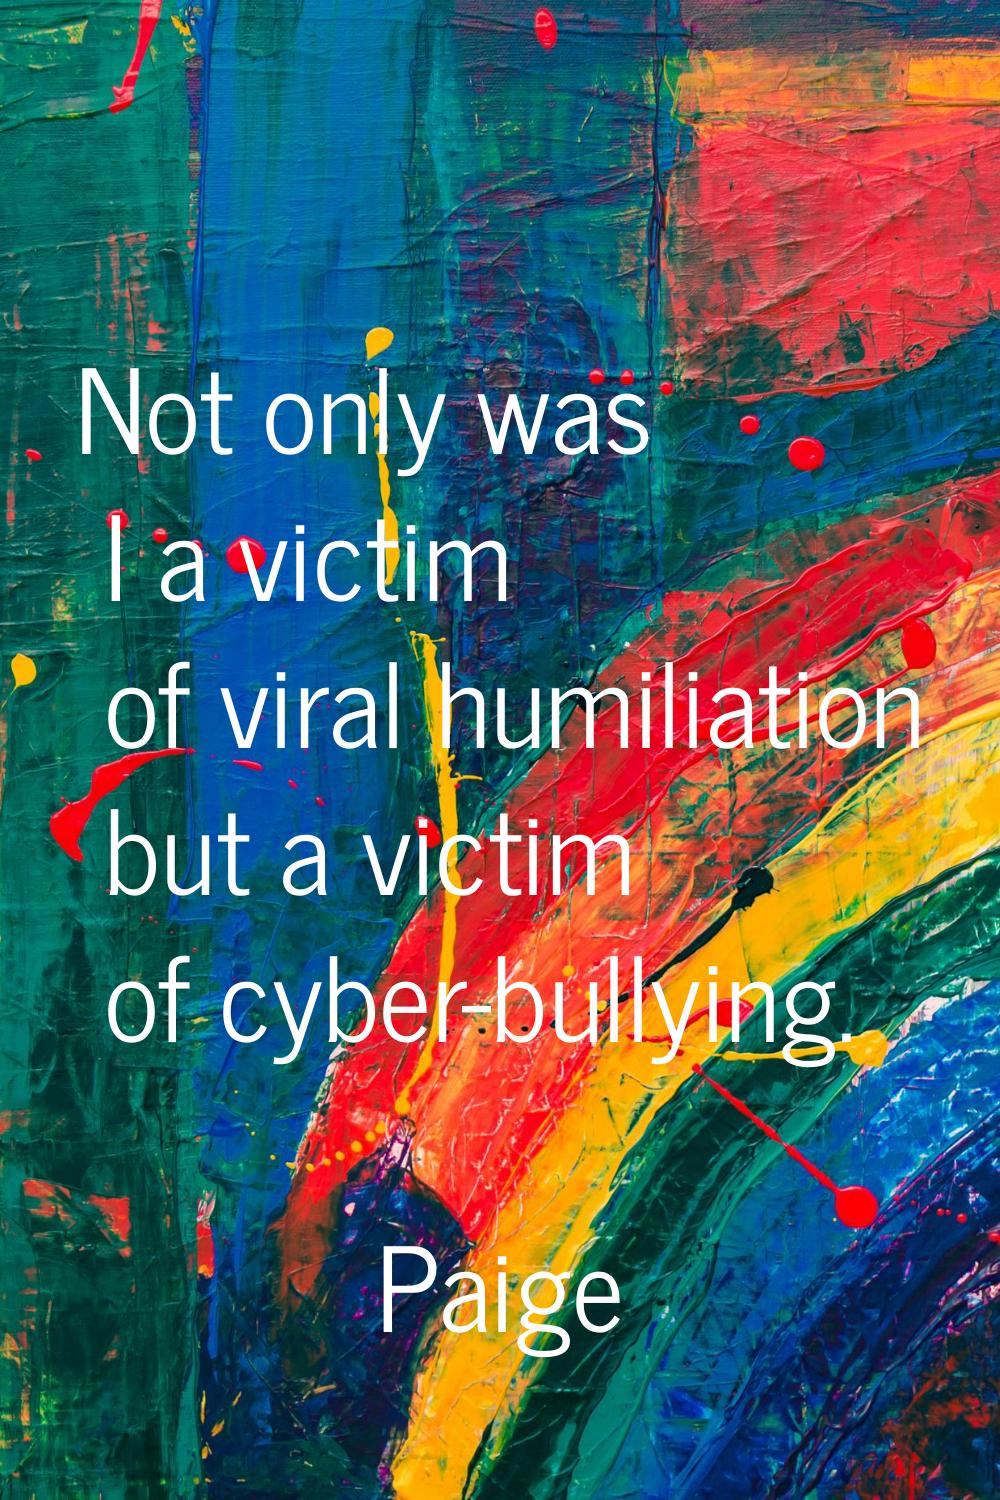 Not only was I a victim of viral humiliation but a victim of cyber-bullying.